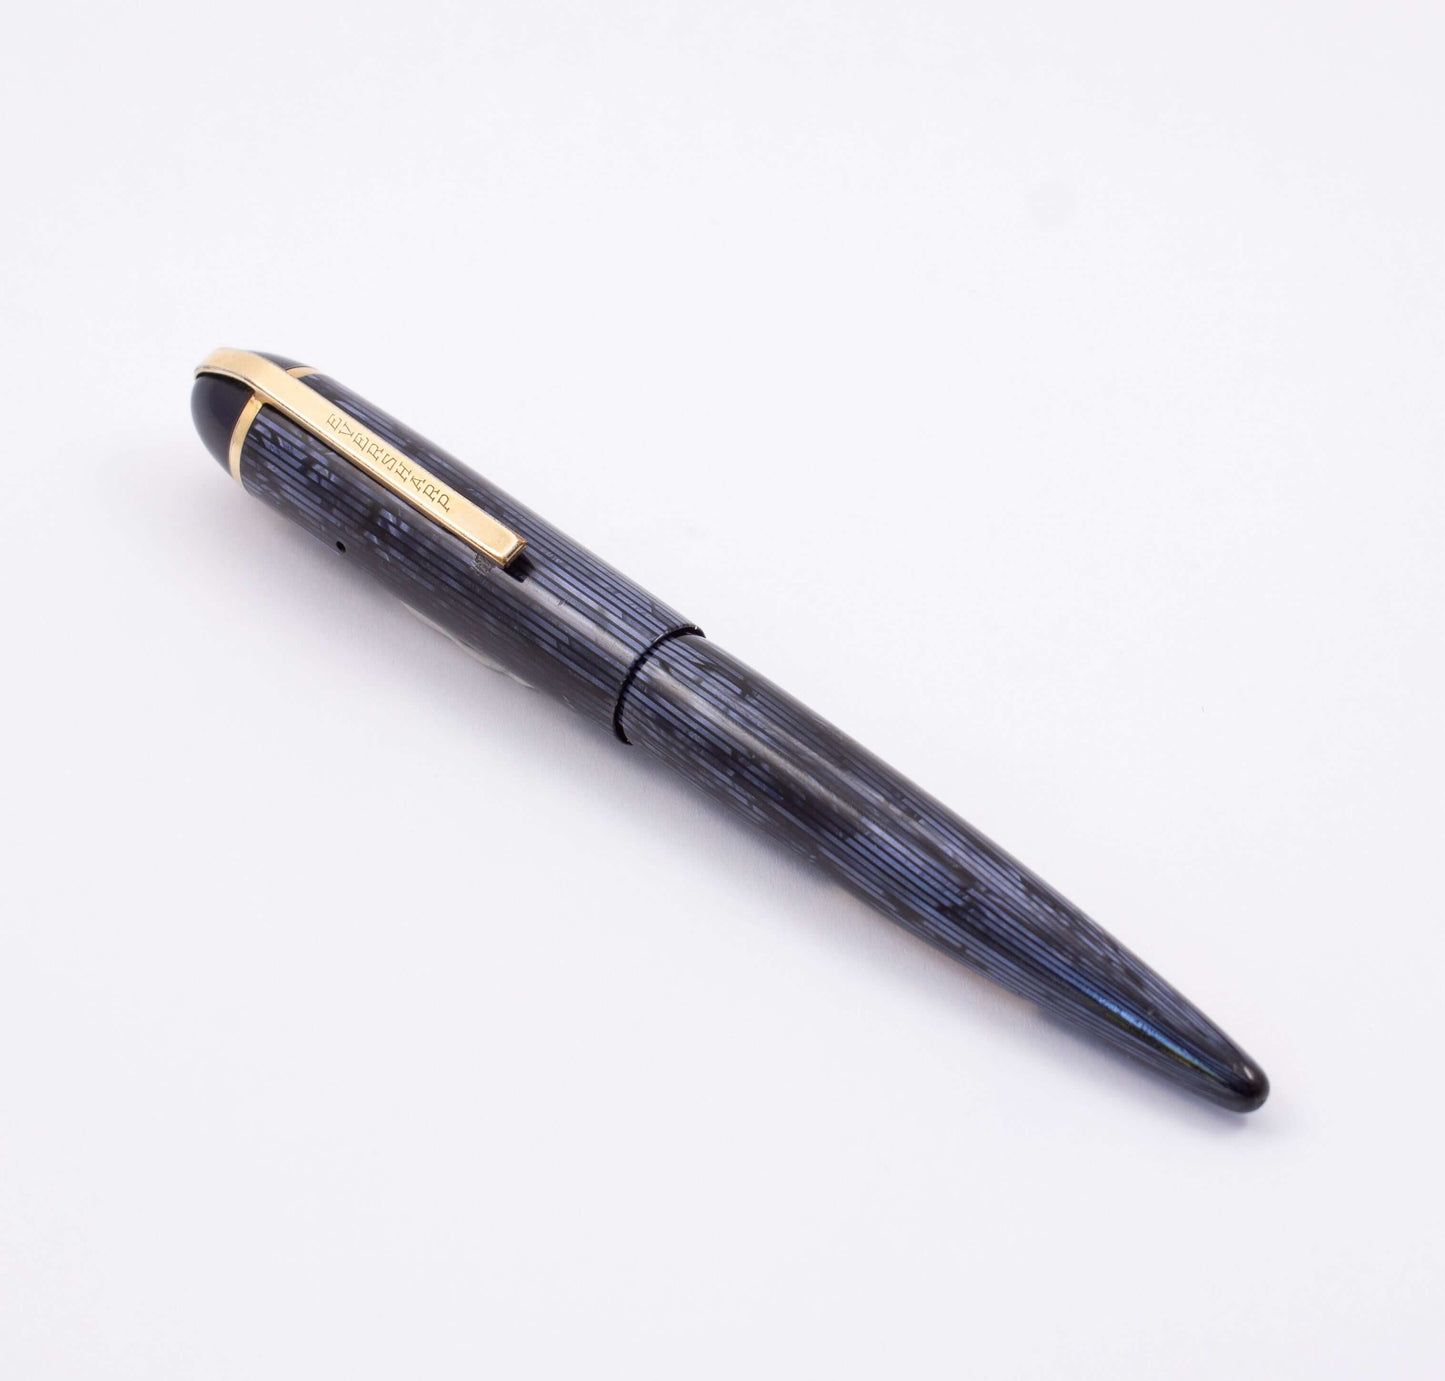 Eversharp Skyline Fountain Pen, Modern Strip Blue Cap and Barrel, Gold Filled Trim, Fine 14k Nib Type: Restored Lever Filling Fountain Pen Product Name: Eversharp Skyline Manufacture Year: 1940's Length: ﻿4 3/4 Filling System: Lever Filler, restored with